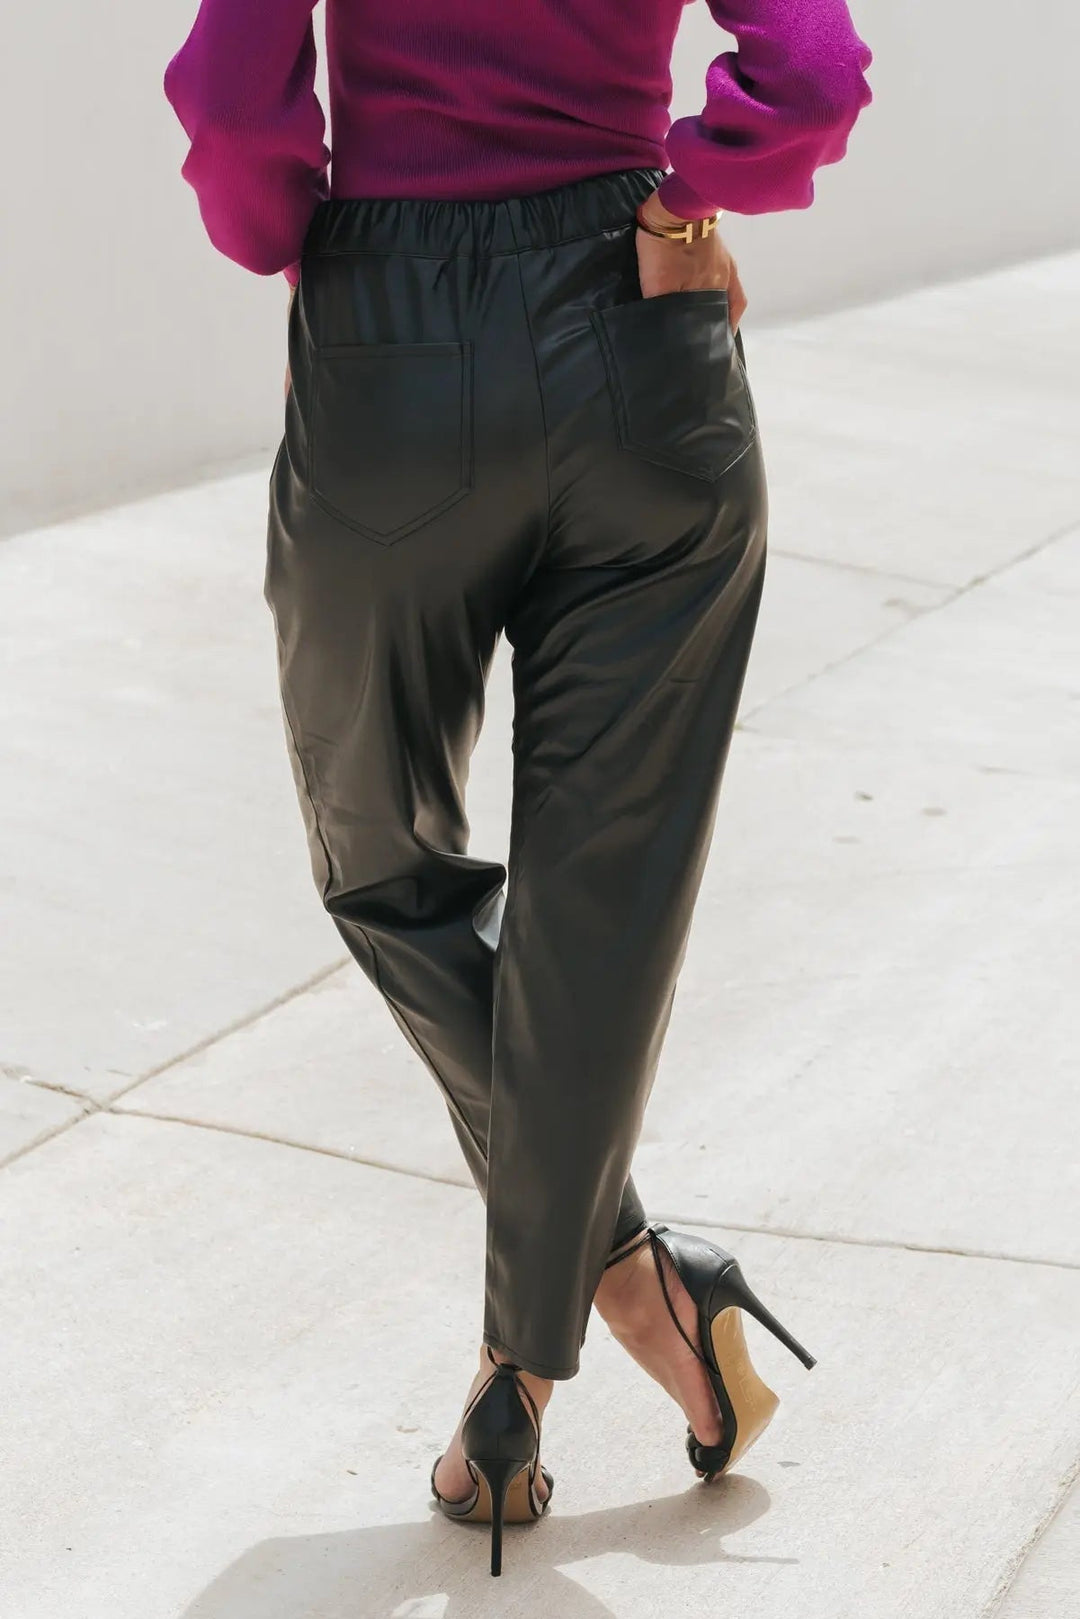 Evelyn Black Faux Leather Joggers - JO+CO